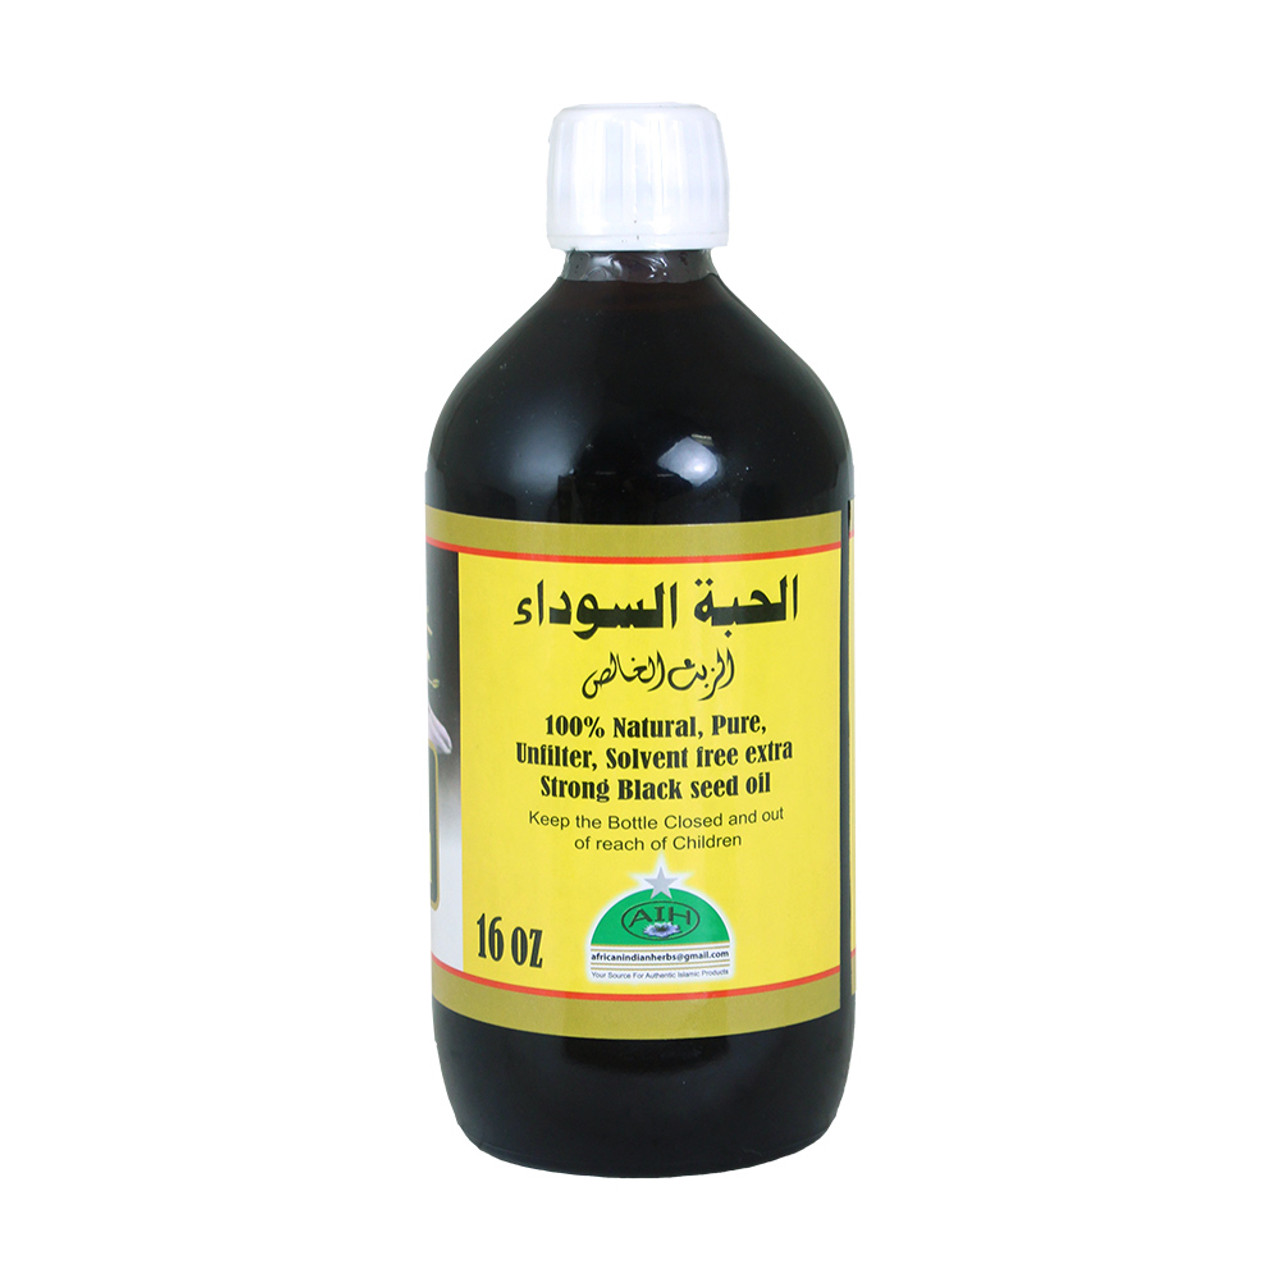 Pure Black Seed Oil - 16 oz. - Healing Oils - African Health & Beauty